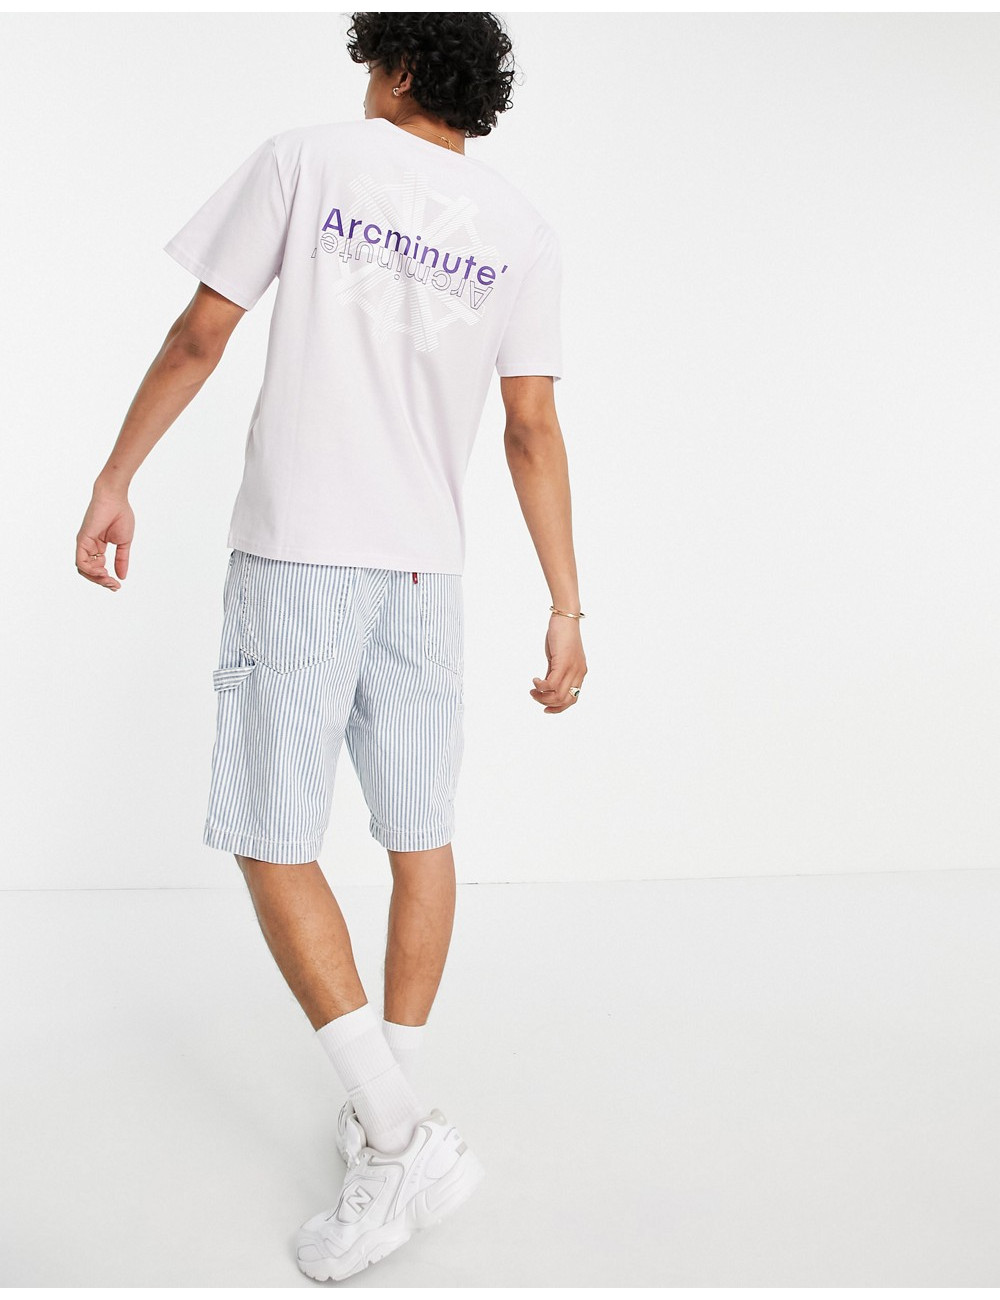 Arcminute t-shirt with back...